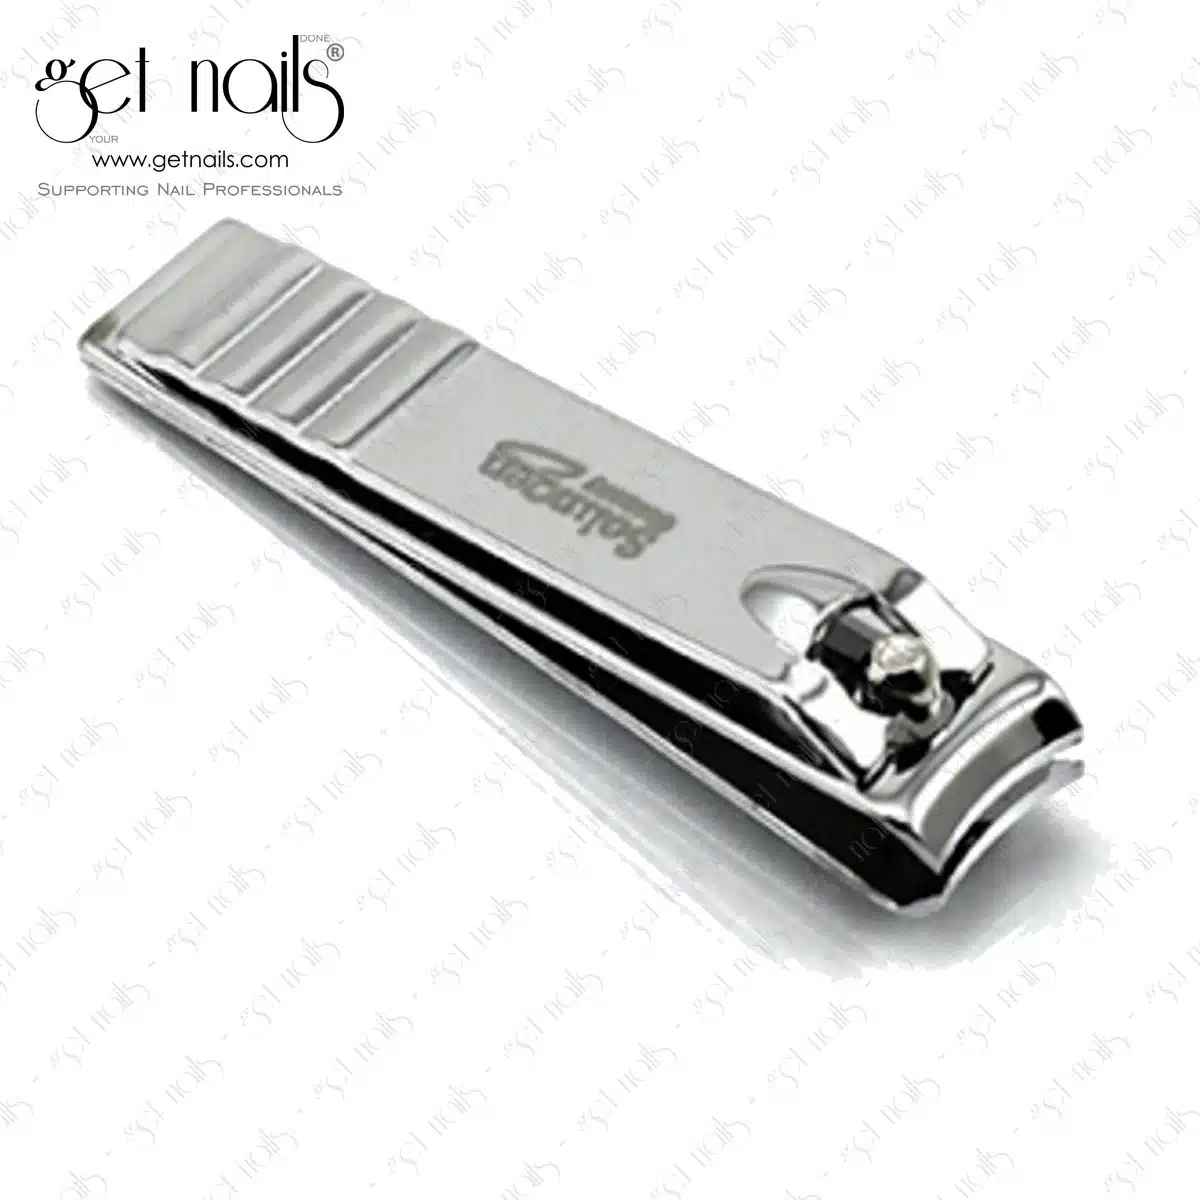 Get Nails Austria - Nail clippers large